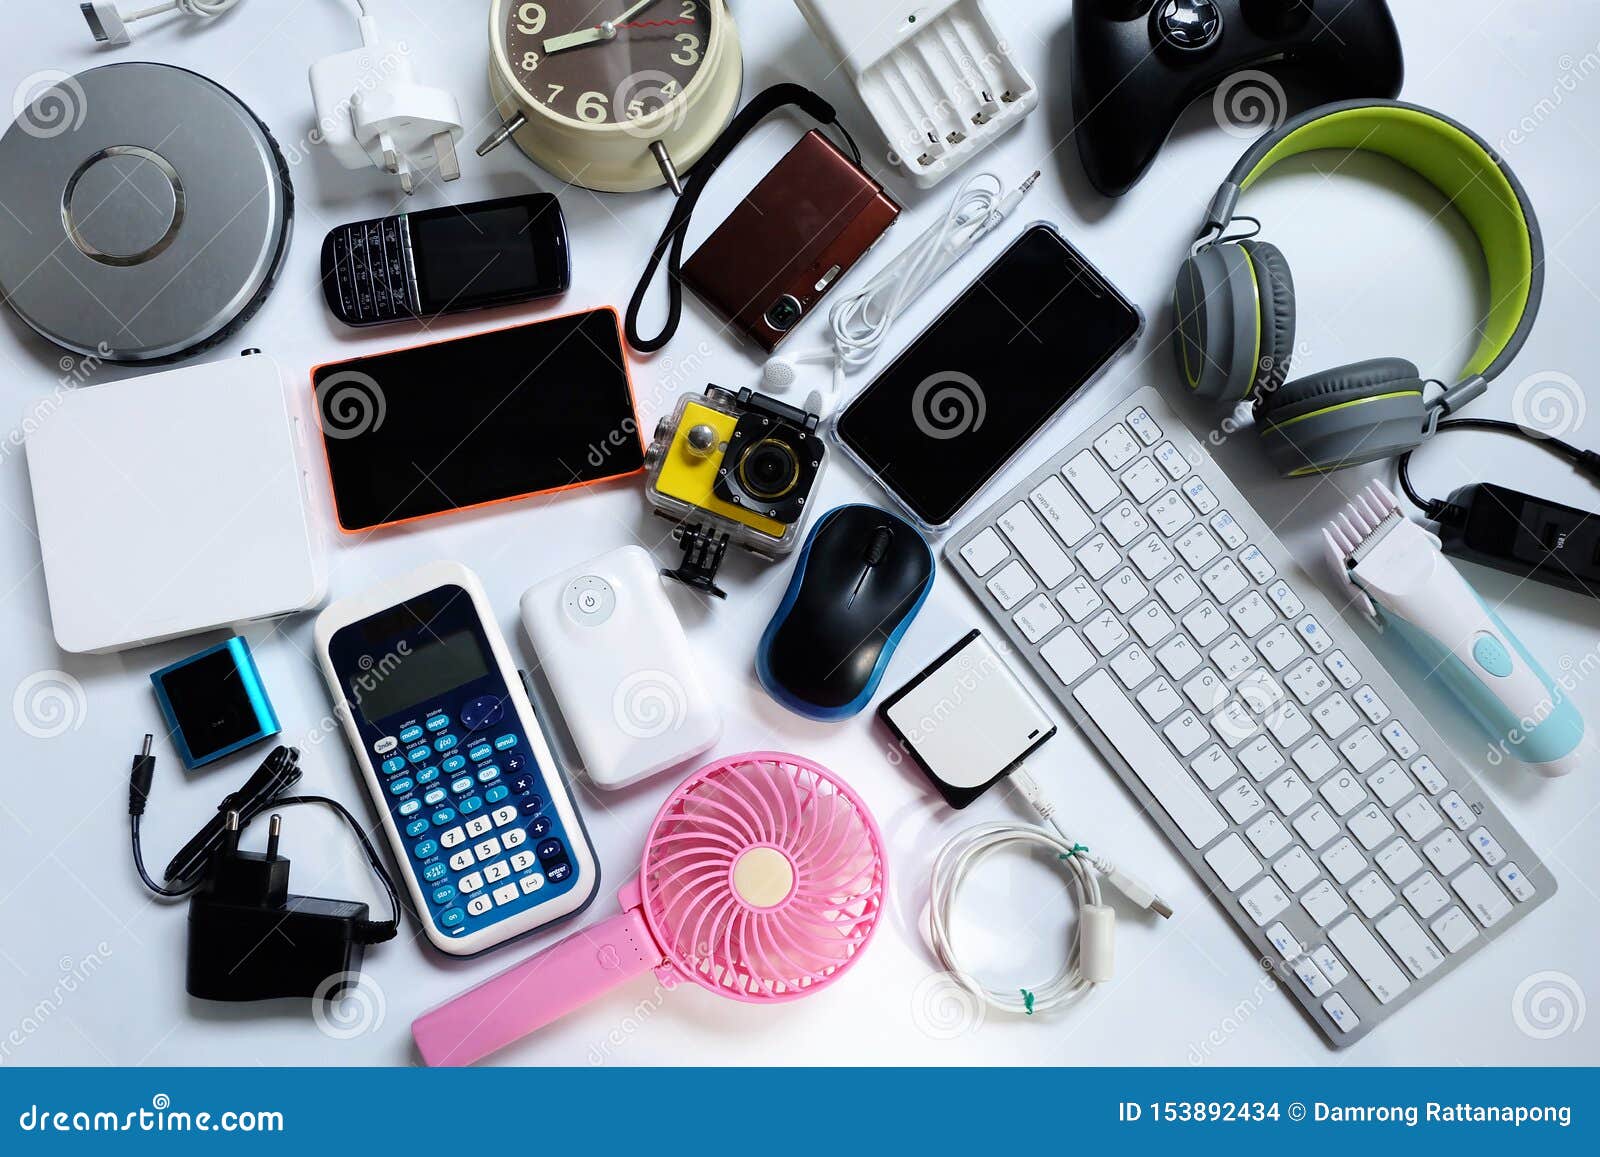 many used modern electronic gadgets for daily use on white floor, reuse and recycle concept